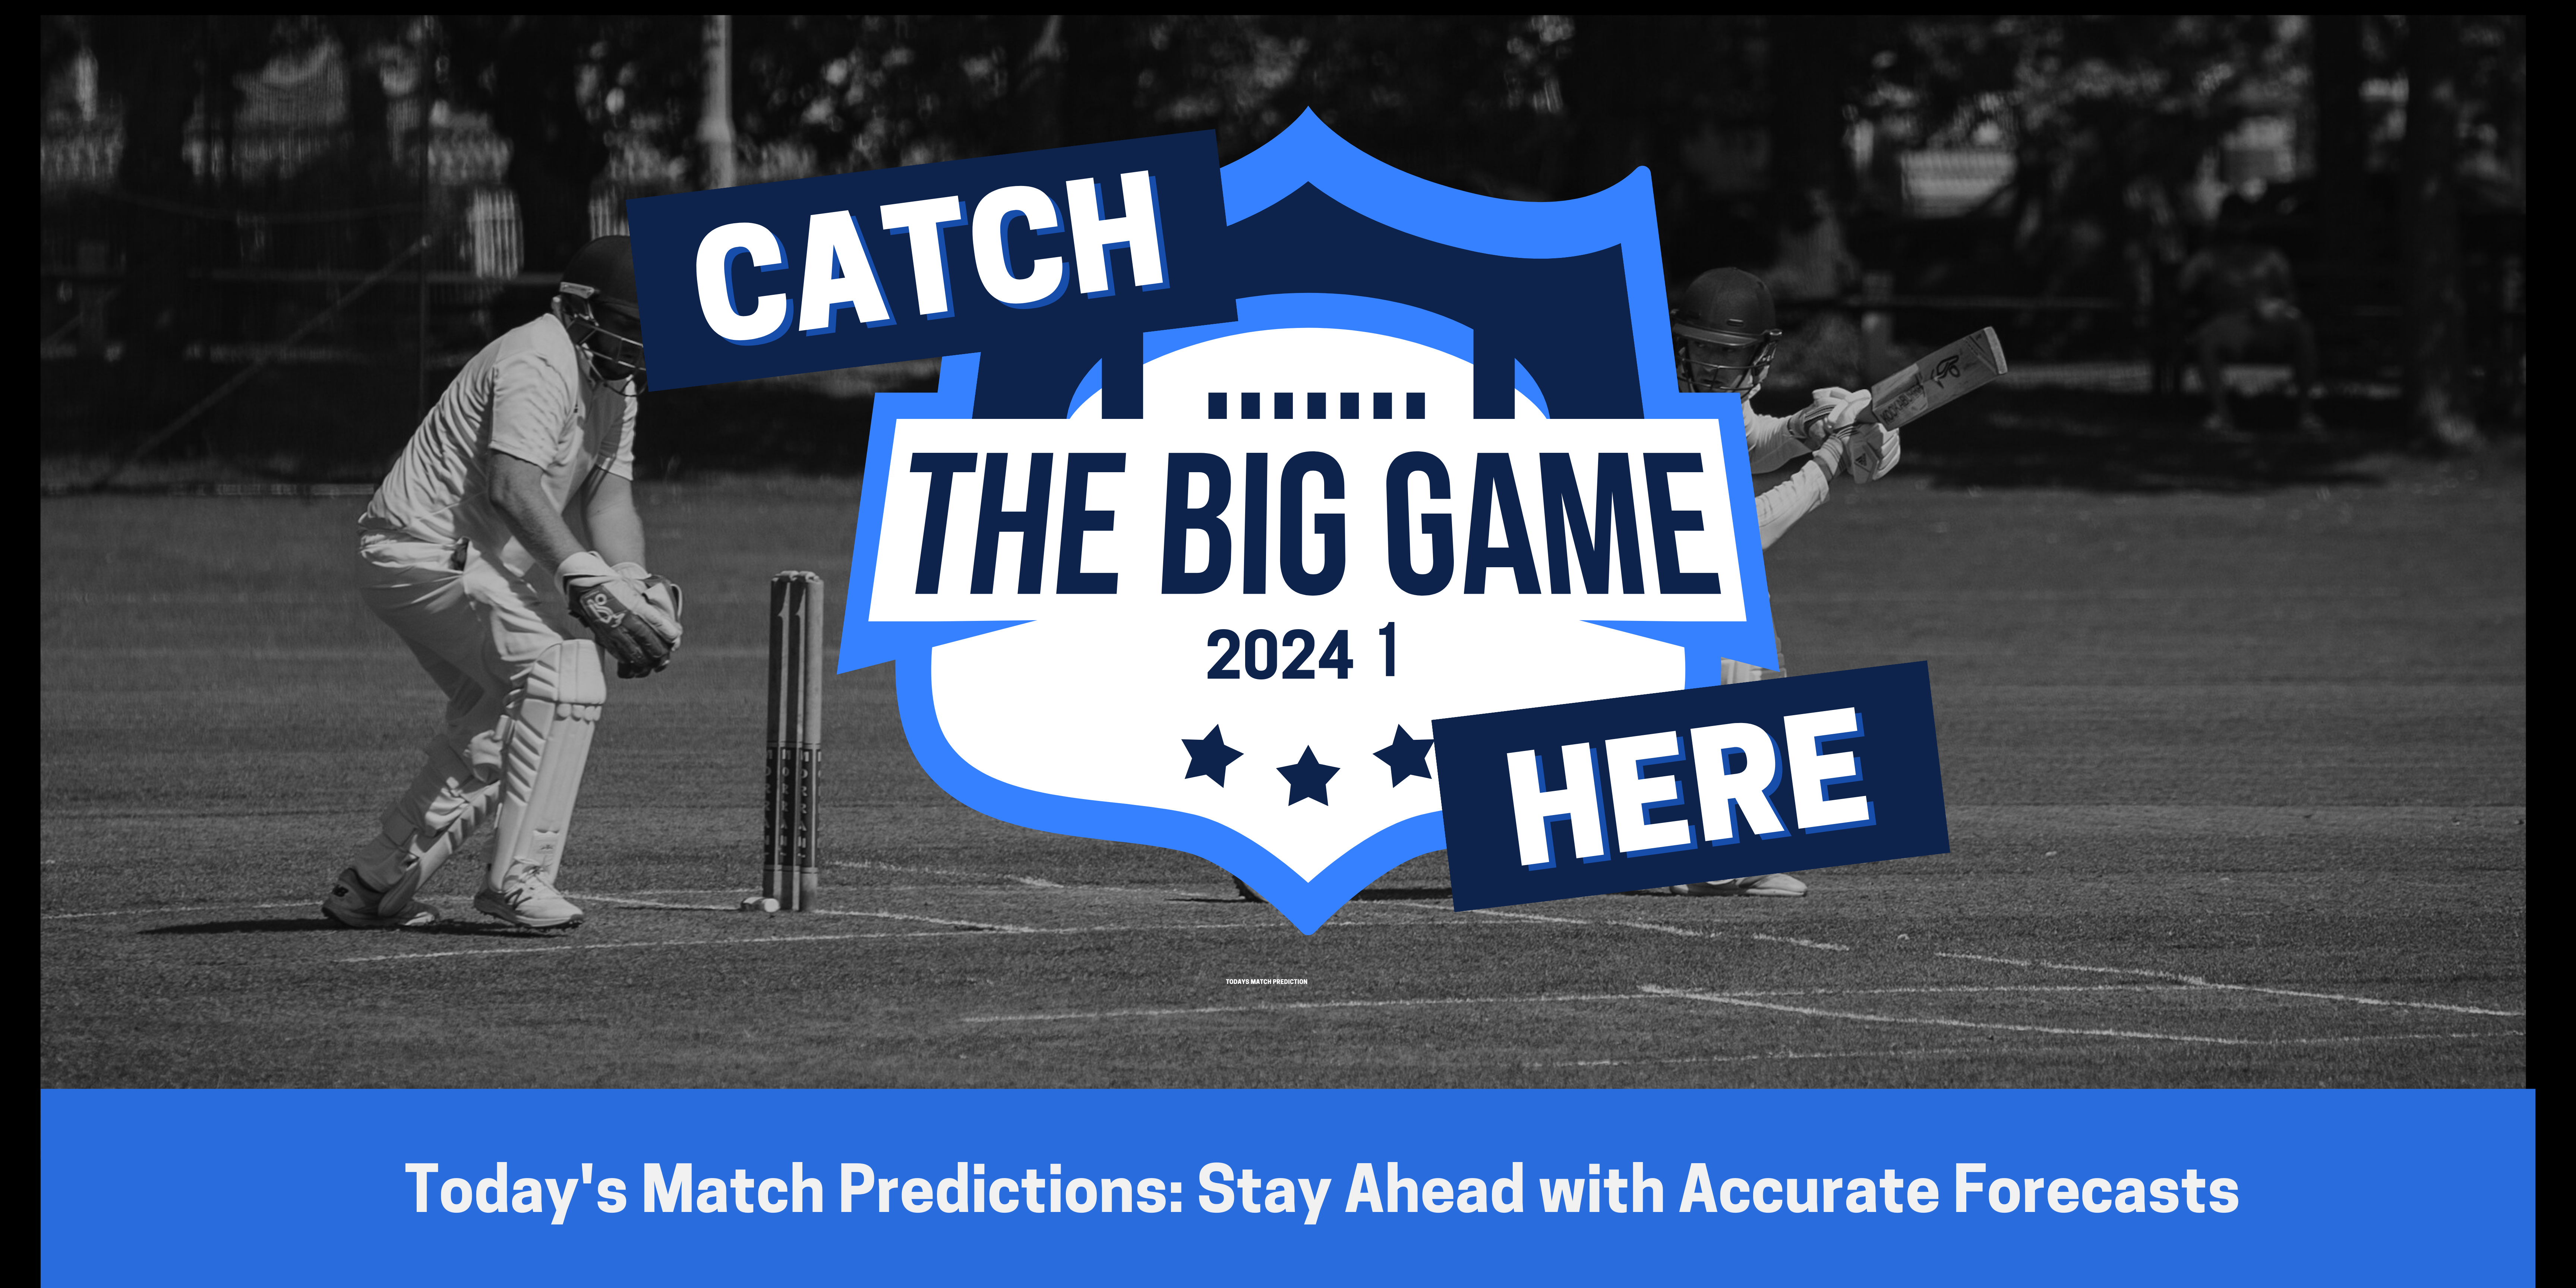 Today's Match Predictions: Stay Ahead with Accurate Forecasts"